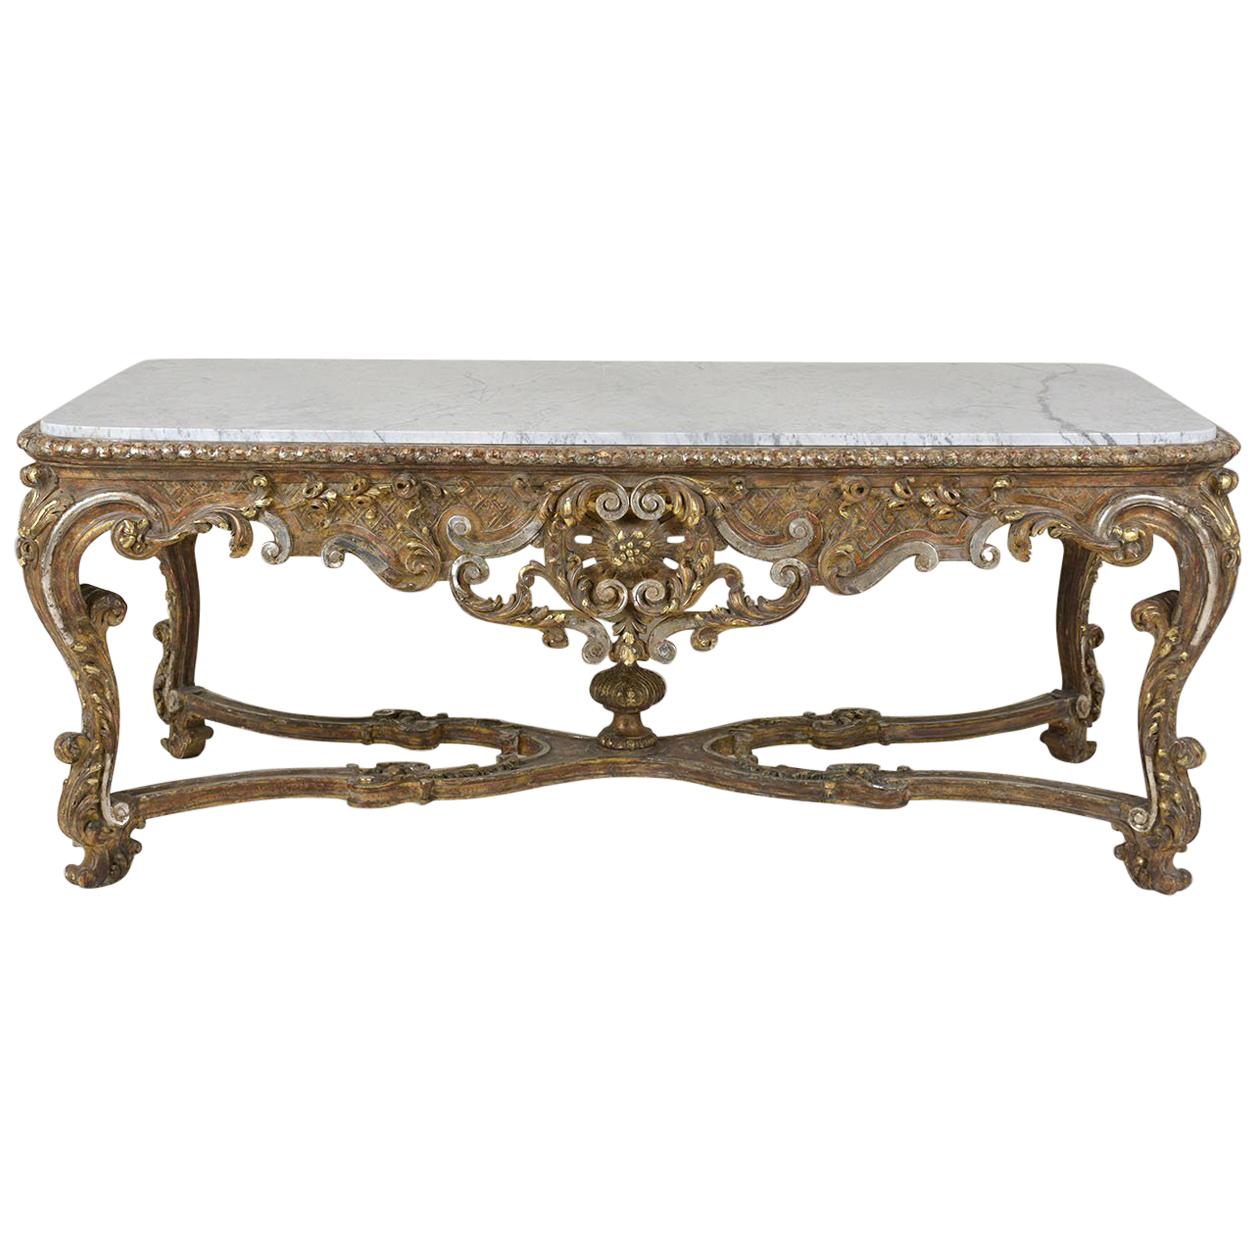 Early 19th Century French Louis XVI Gilt Center Table